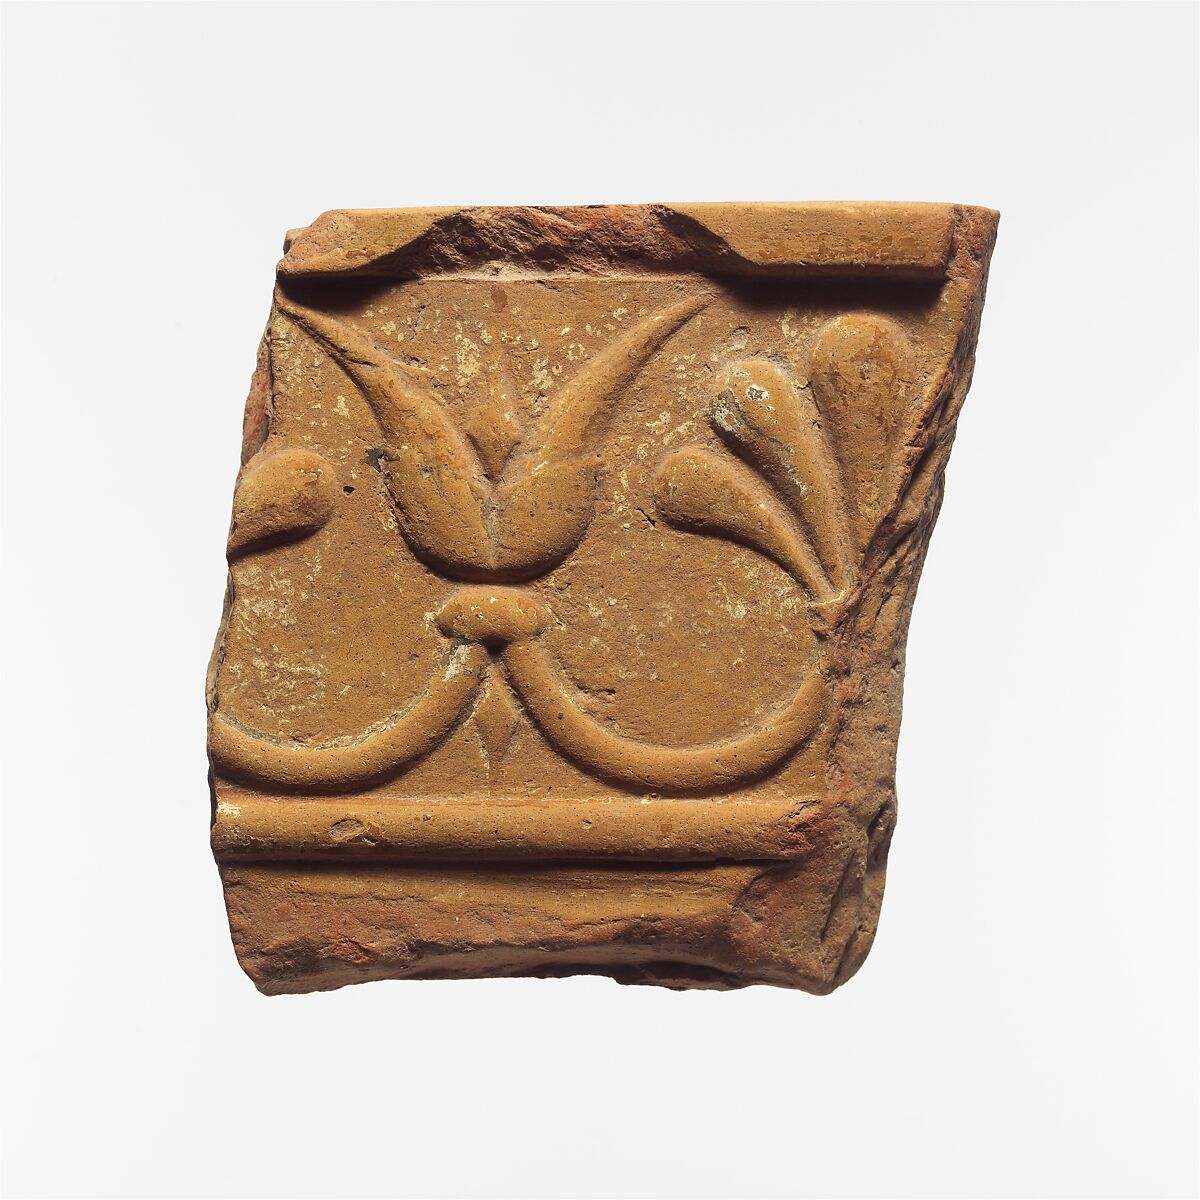 Fragment of a terracotta architectural tile, Terracotta, Lydian 